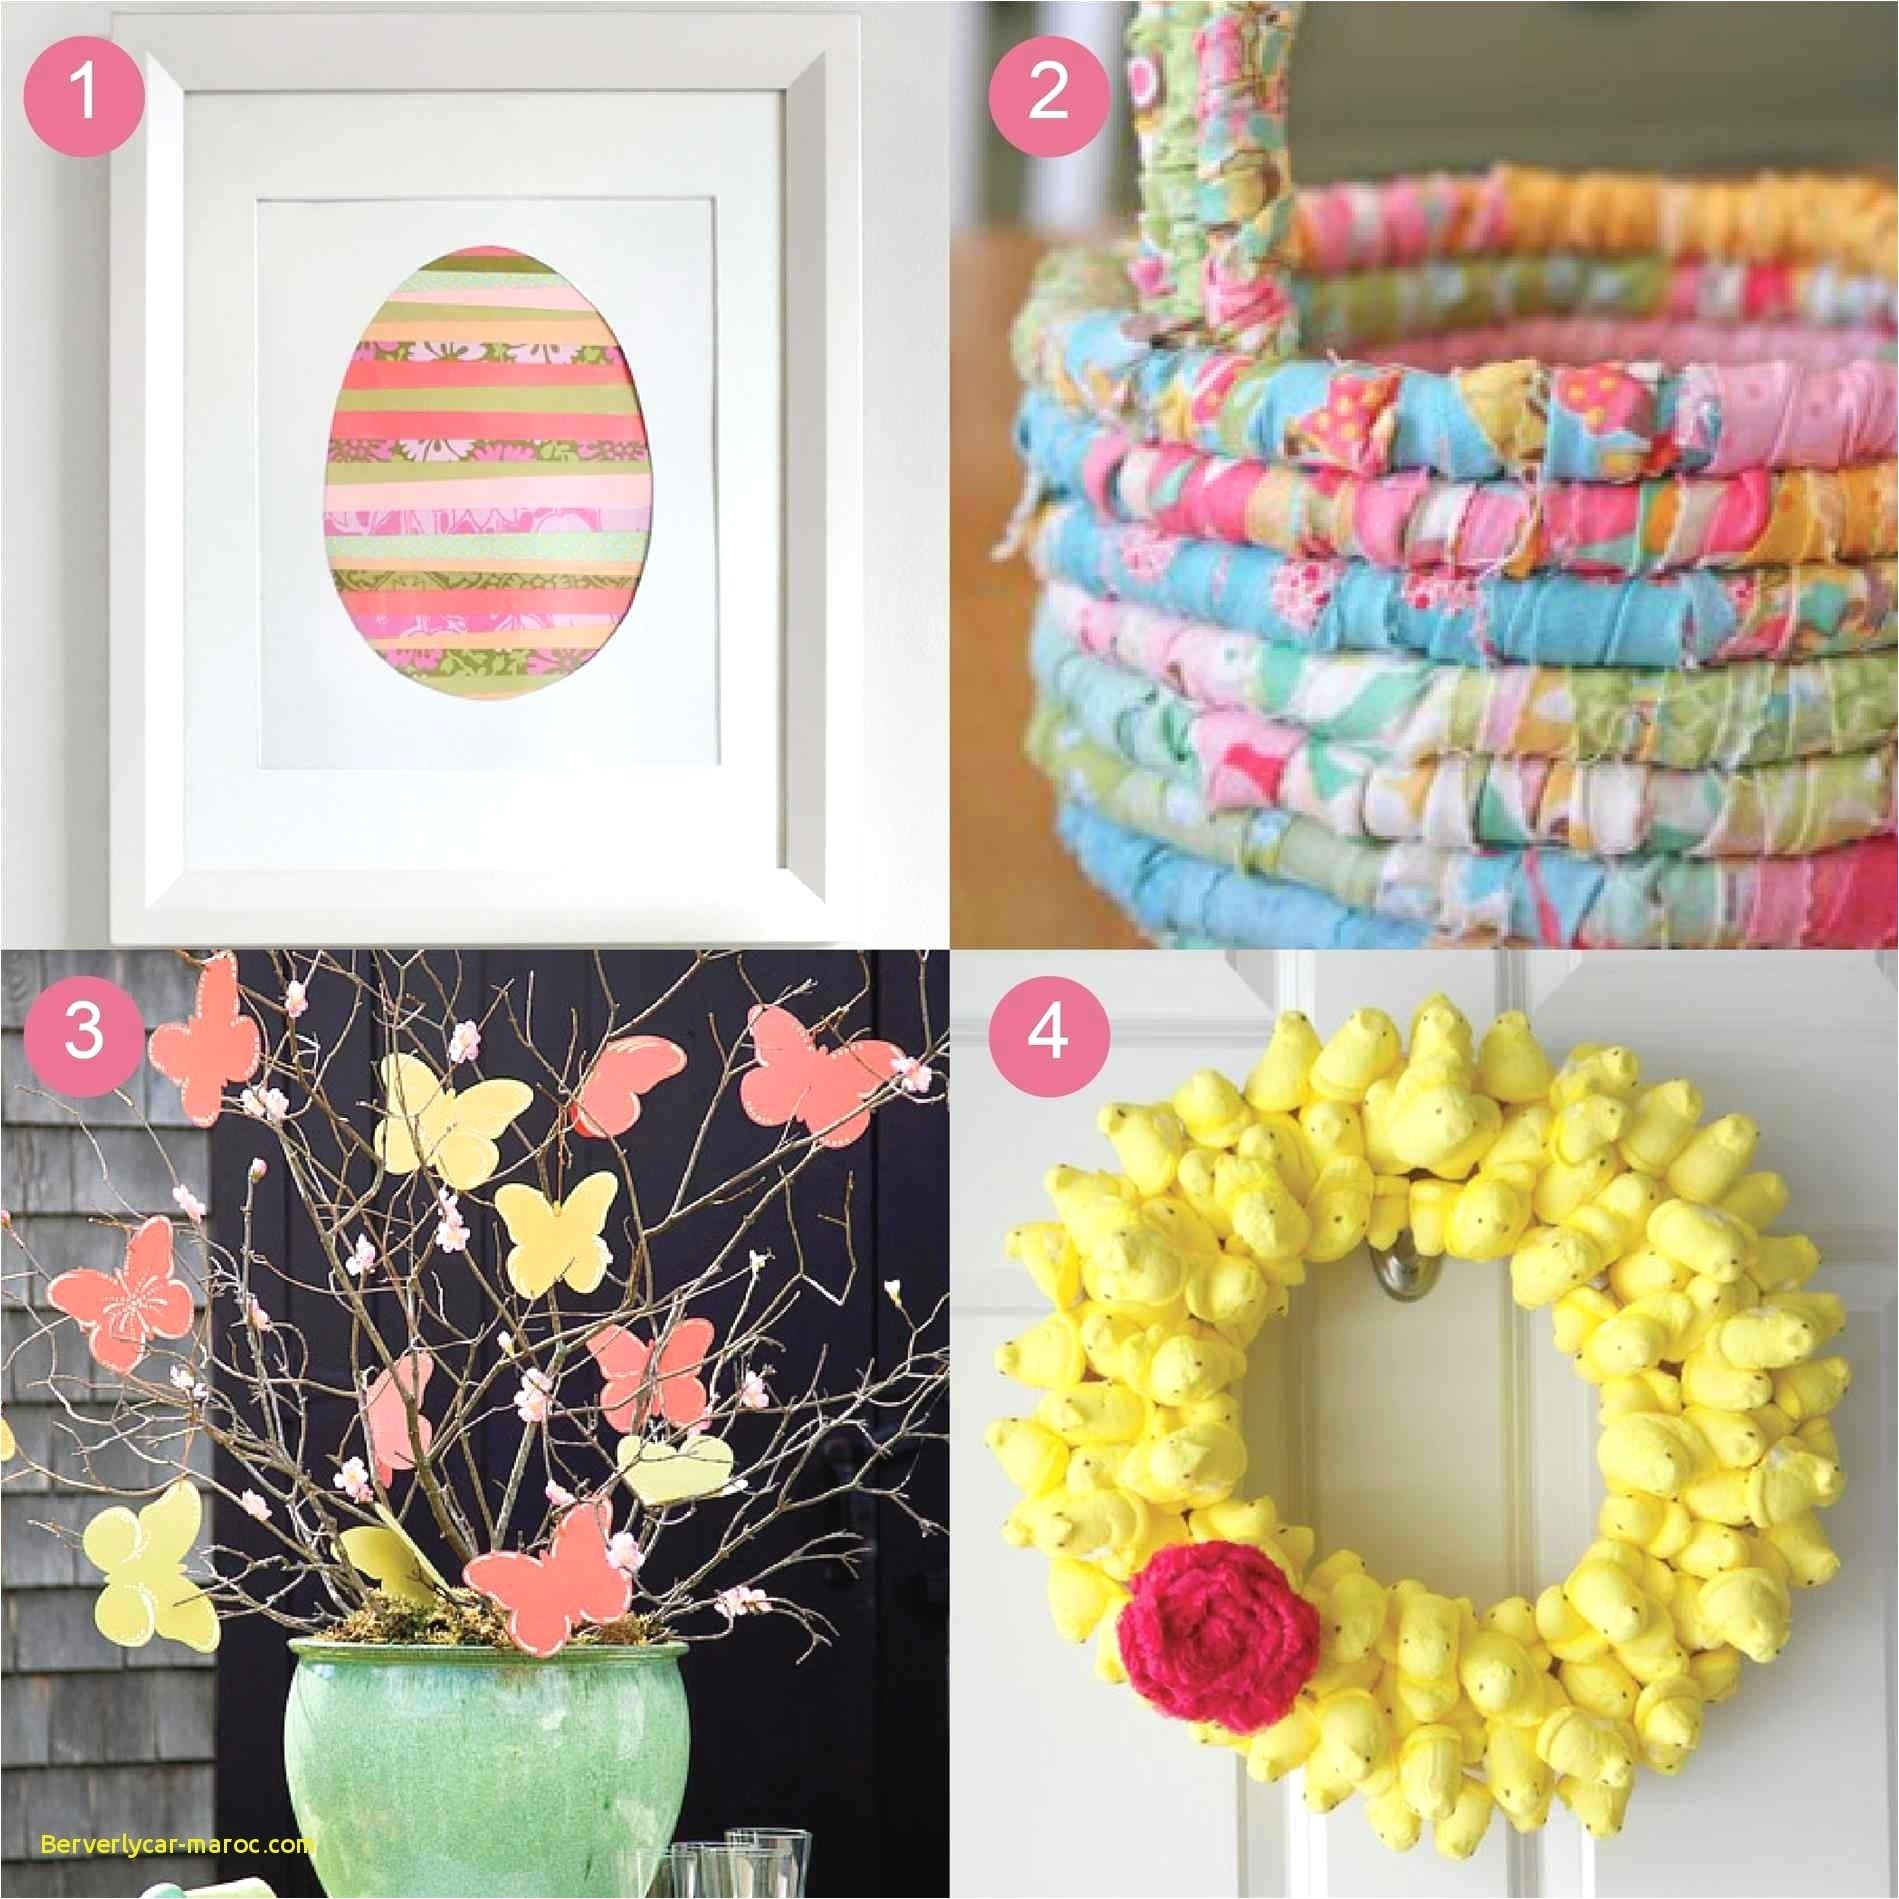 Spring Activities For Adults
 10 Attractive Spring Craft Ideas For Adults 2019